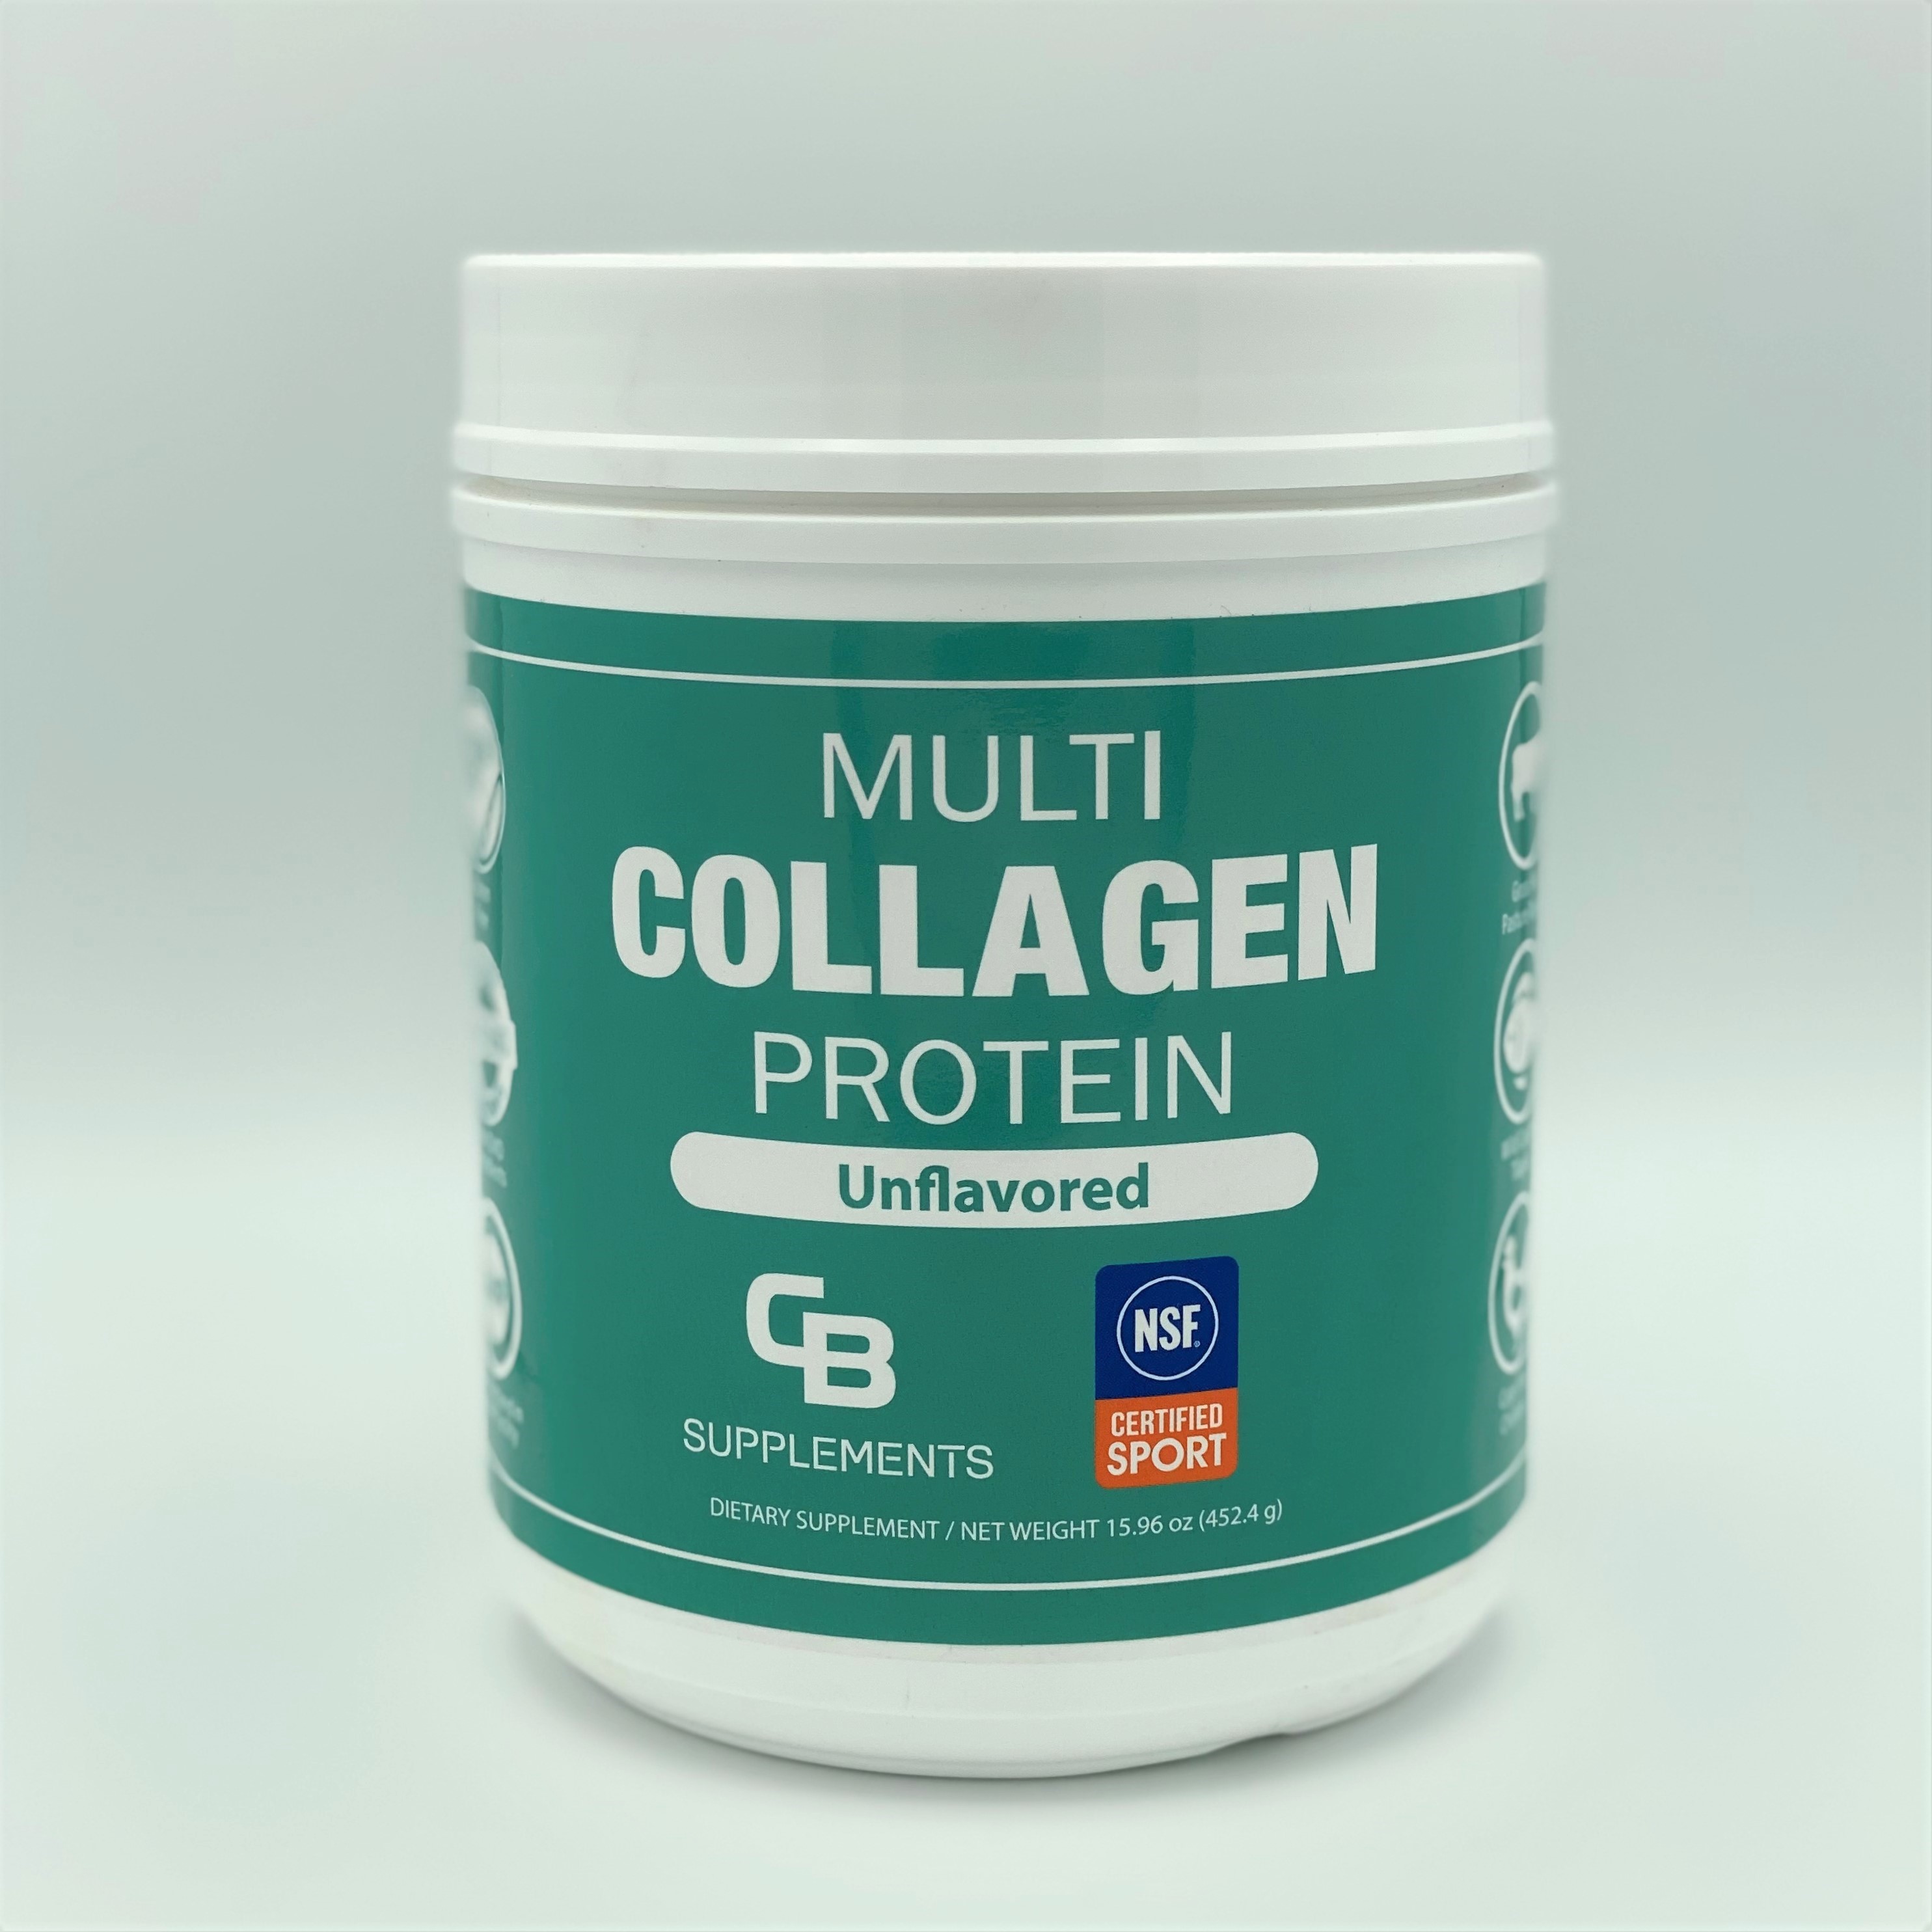 The First and Only Multi Collagen NSF Certified for Sport®